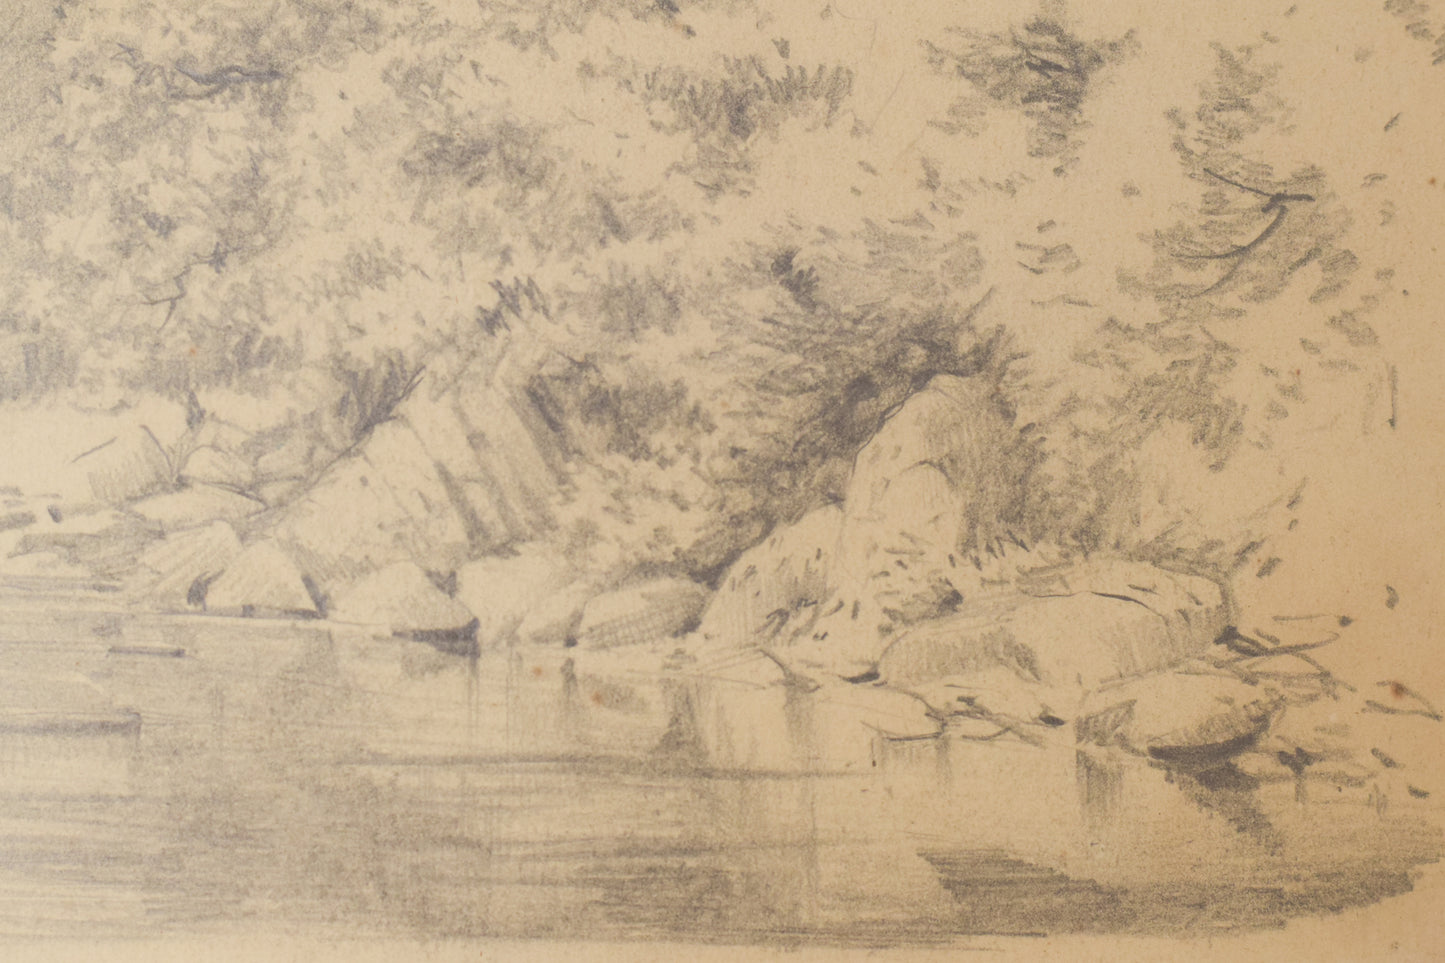 'On The Cree' - Landscape Drawing of a River